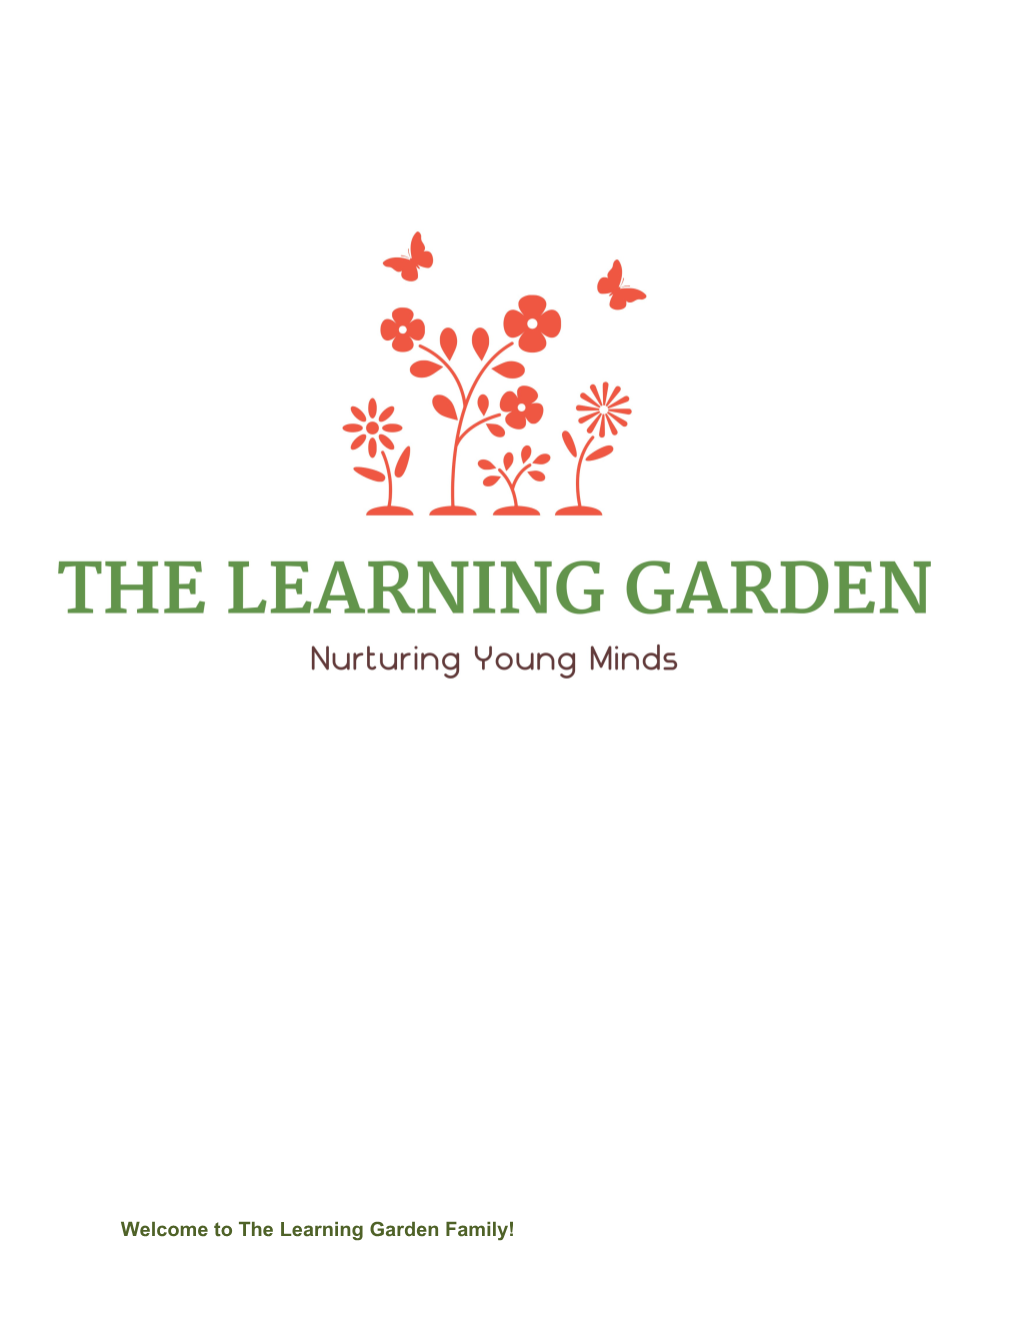 Welcome to the Learning Garden Family!